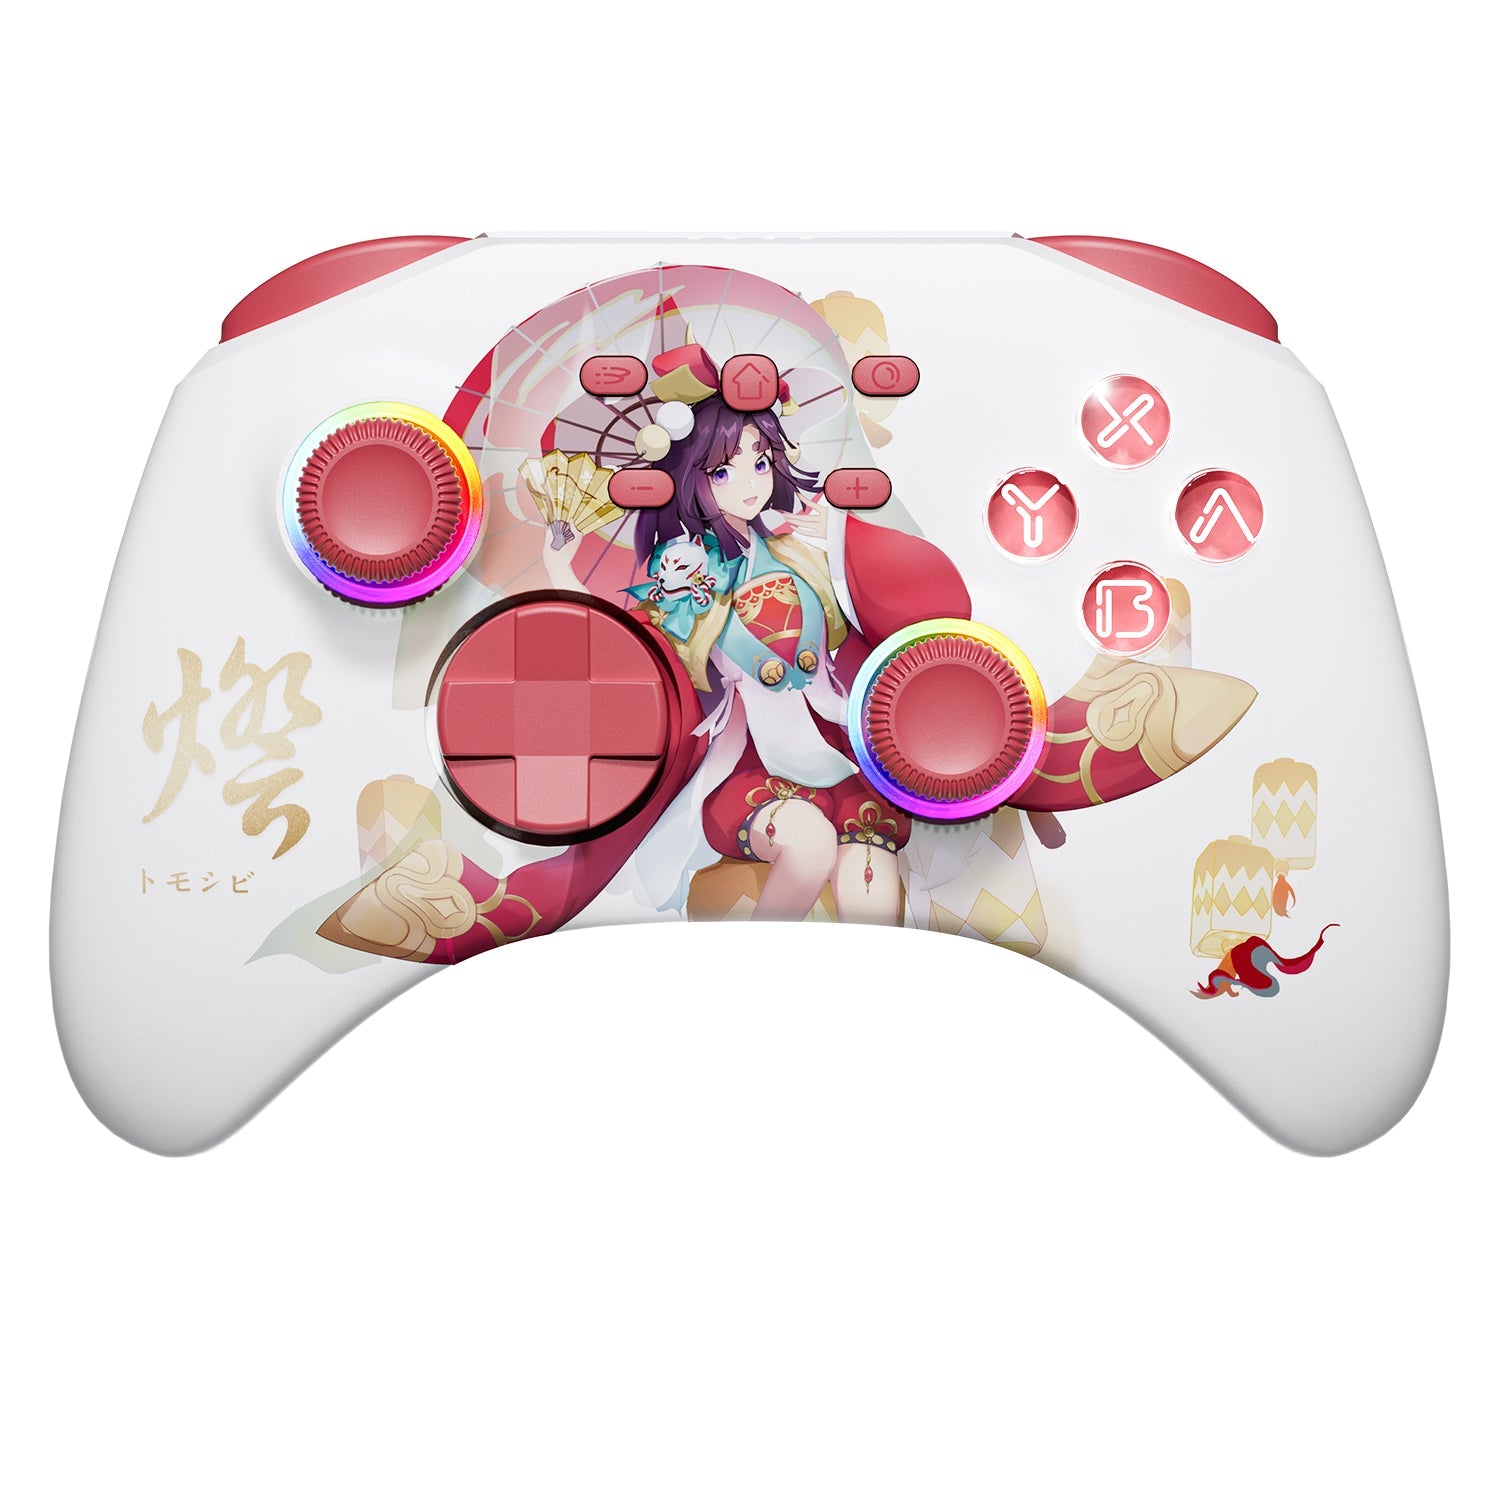 Wireless Pro controller with RGB, programmable buttons, beautiful girl design, red and white